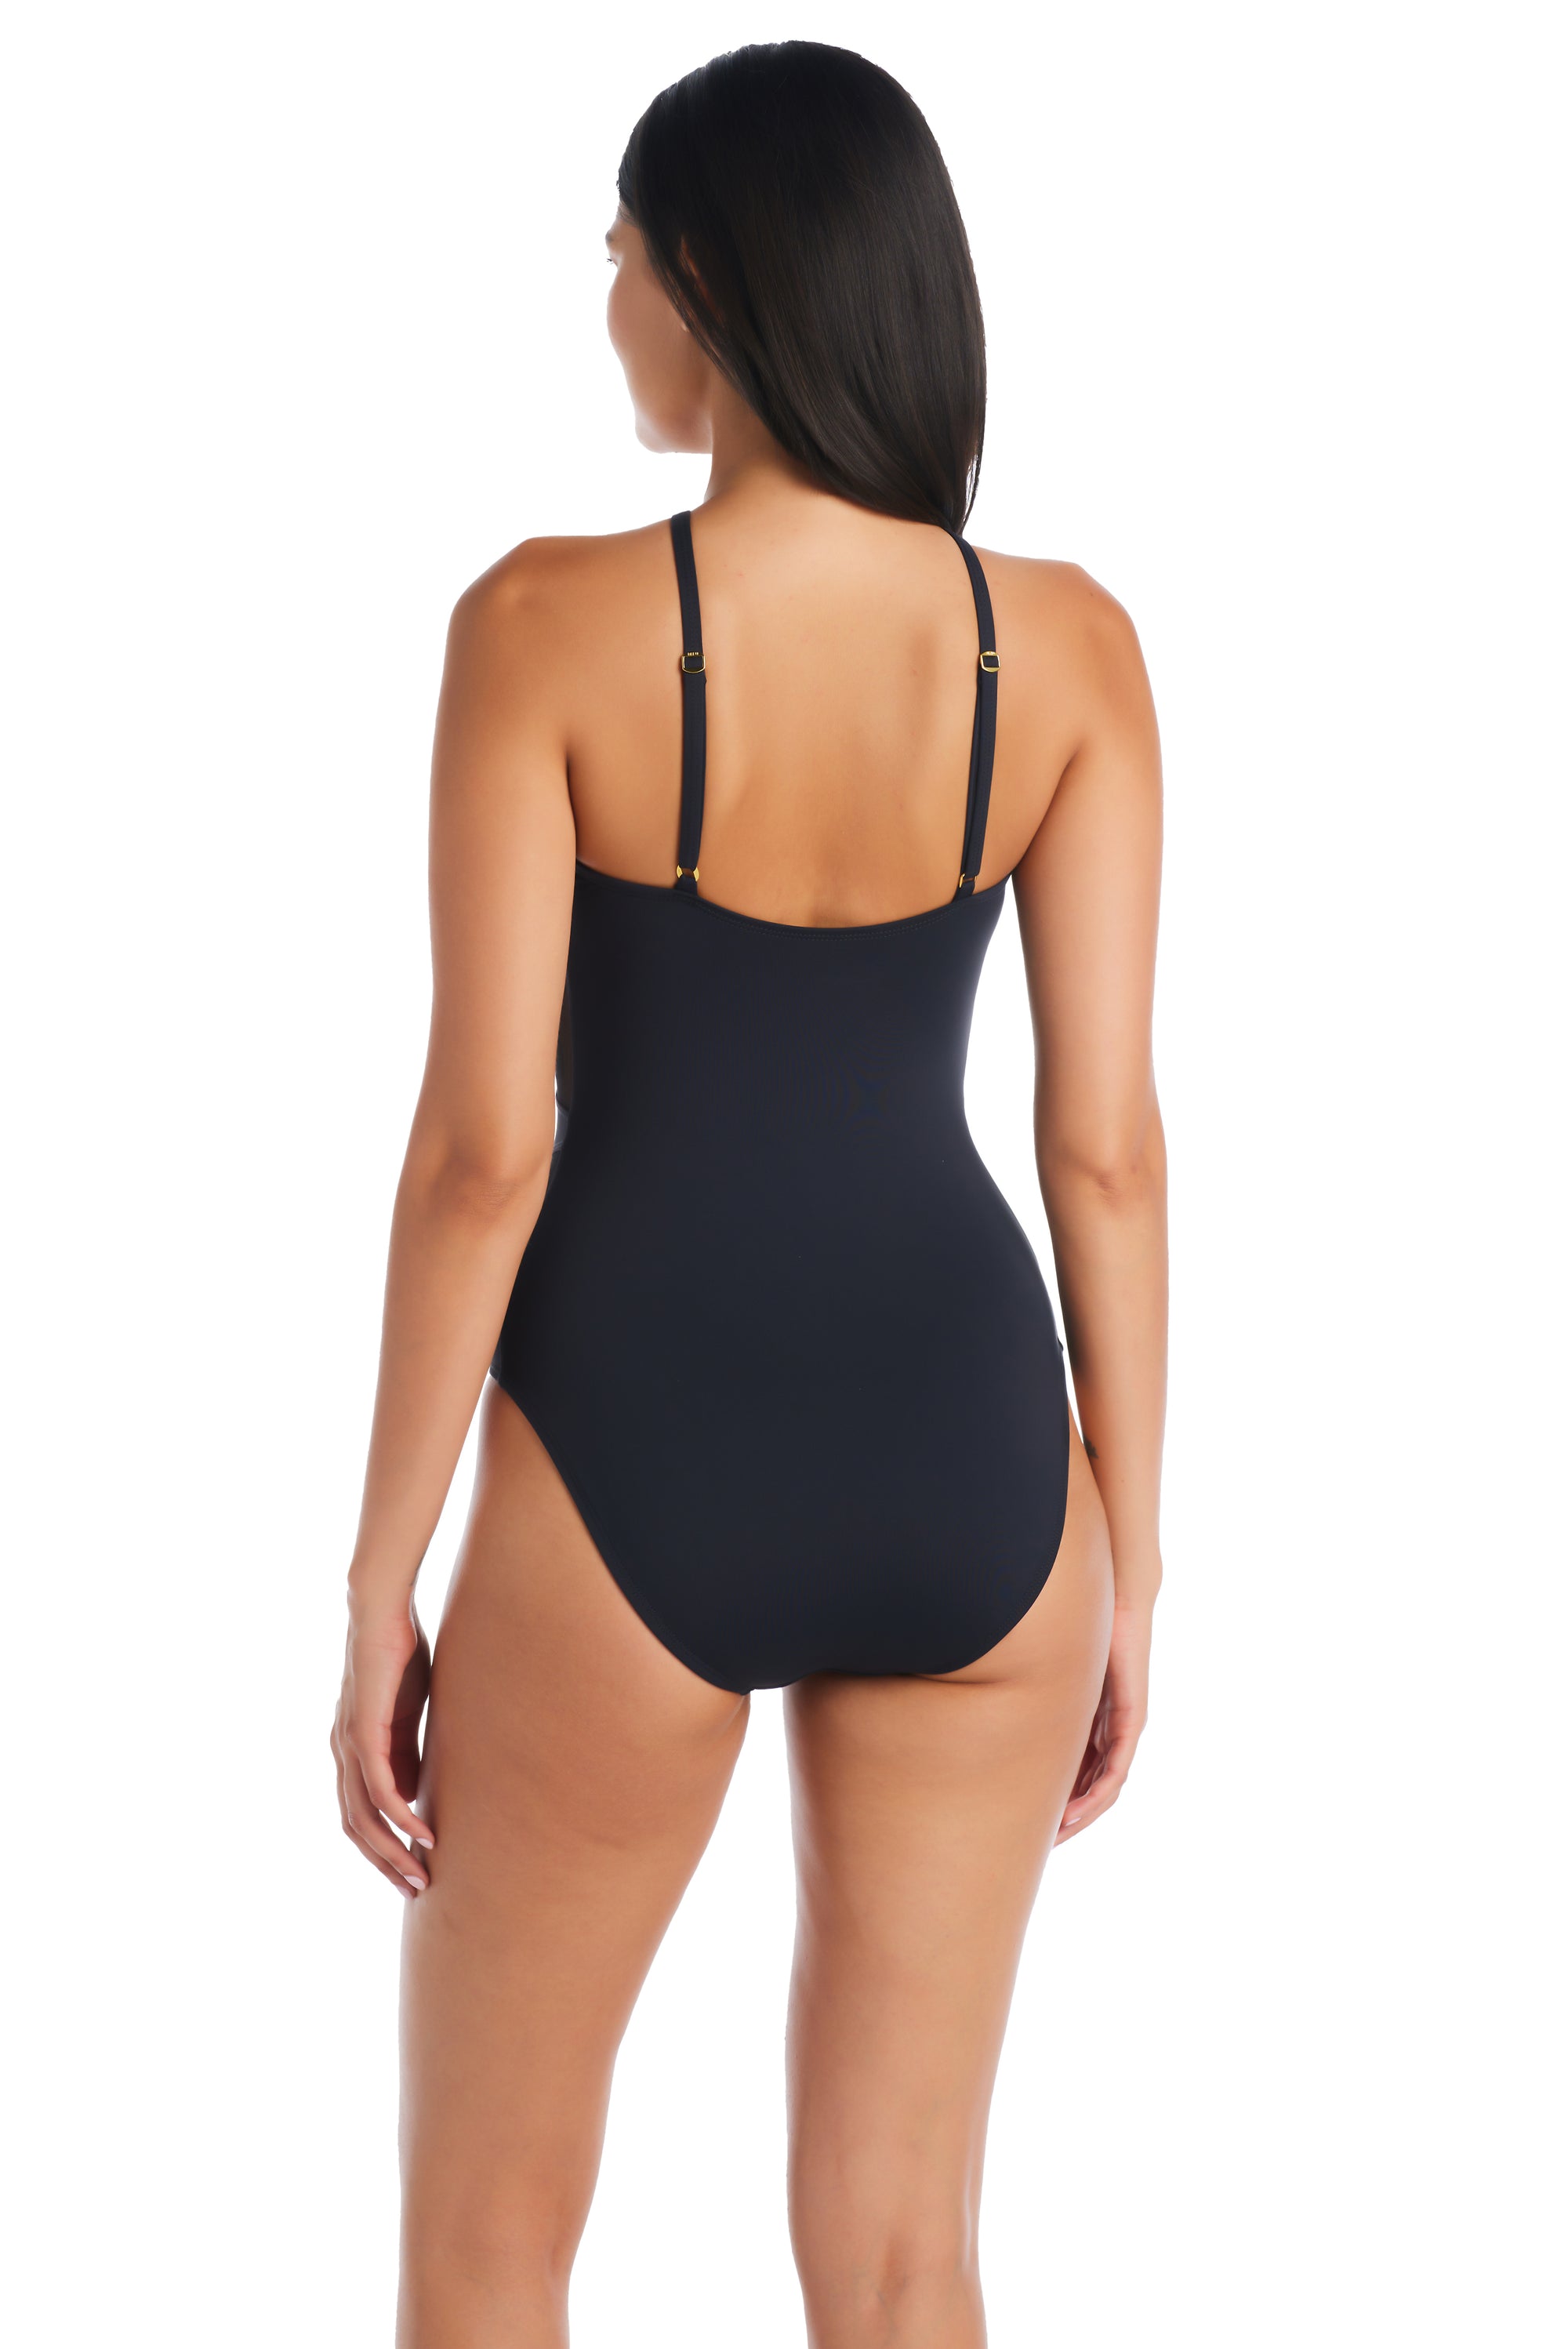 Bleu Rod Beattie Don't Mesh With Me High Neck One Piece Swimsuit   Green And Black - Soma